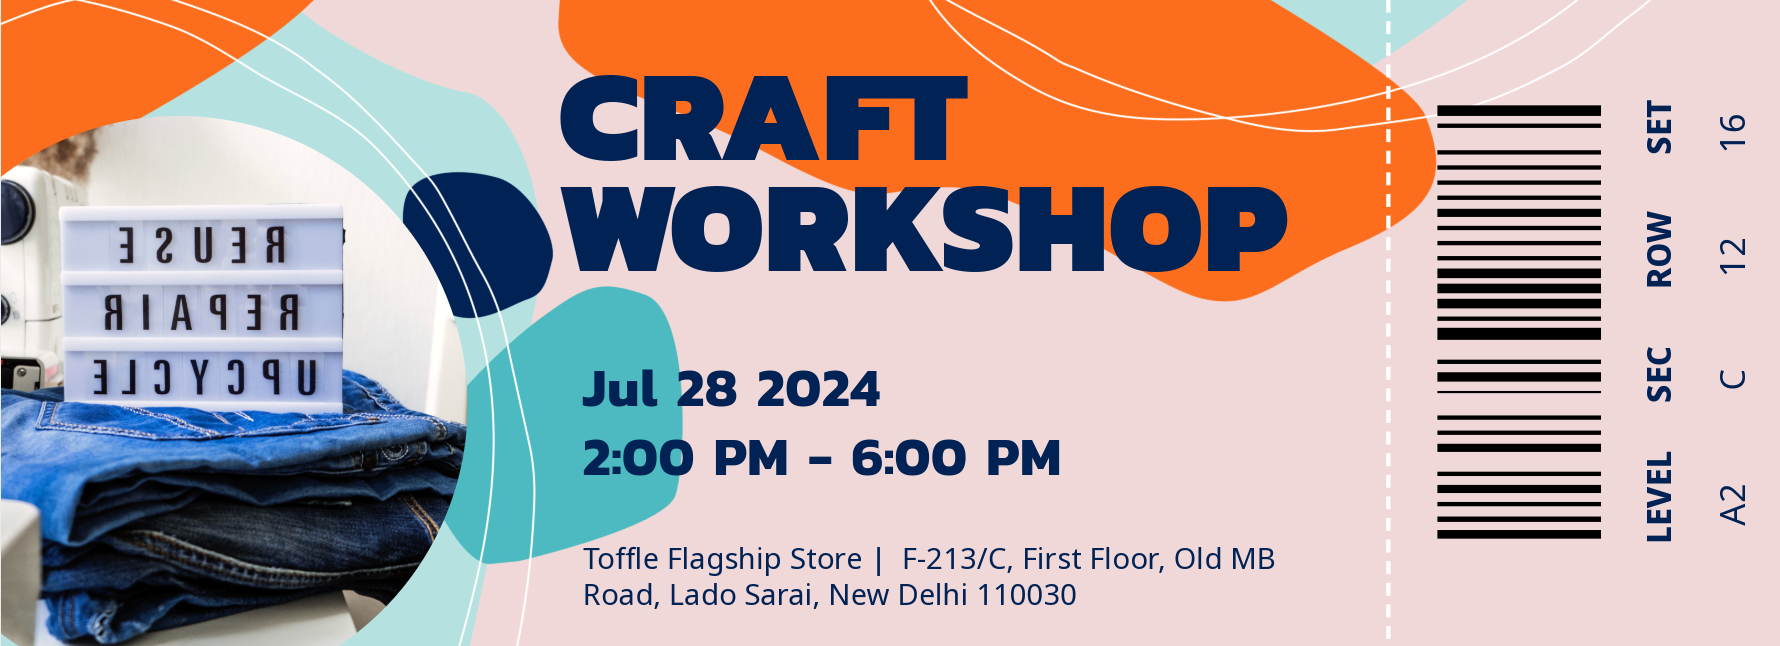 Craft Workshop Ticket (100% Redeemable on Product Purchase)